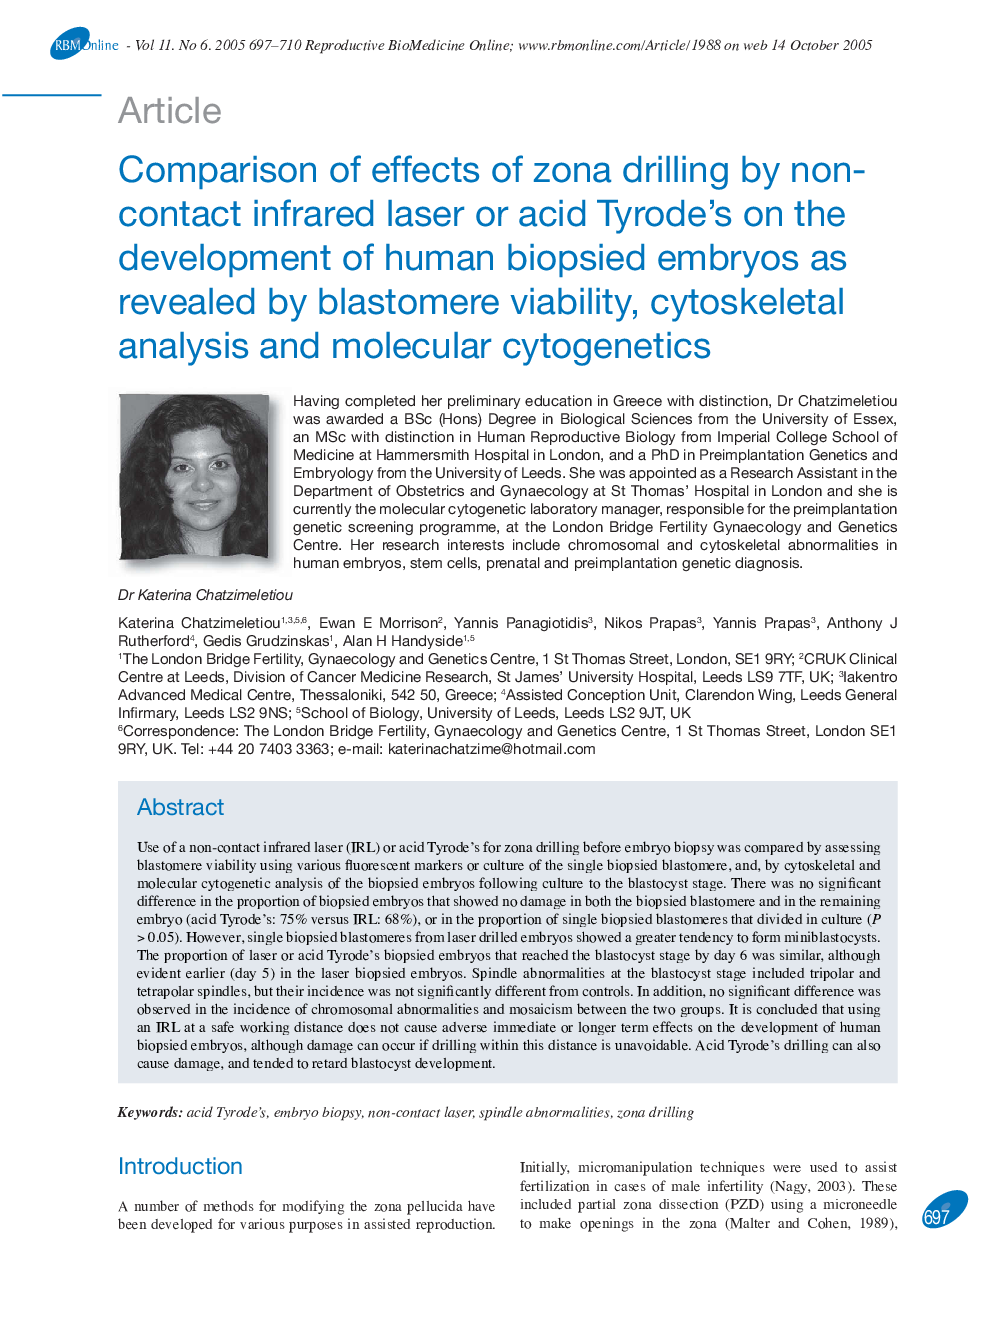 Comparison of effects of zona drilling by non-contact infrared laser or acid Tyrode's on the development of human biopsied embryos as revealed by blastomere viability, cytoskeletal analysis and molecular cytogenetics